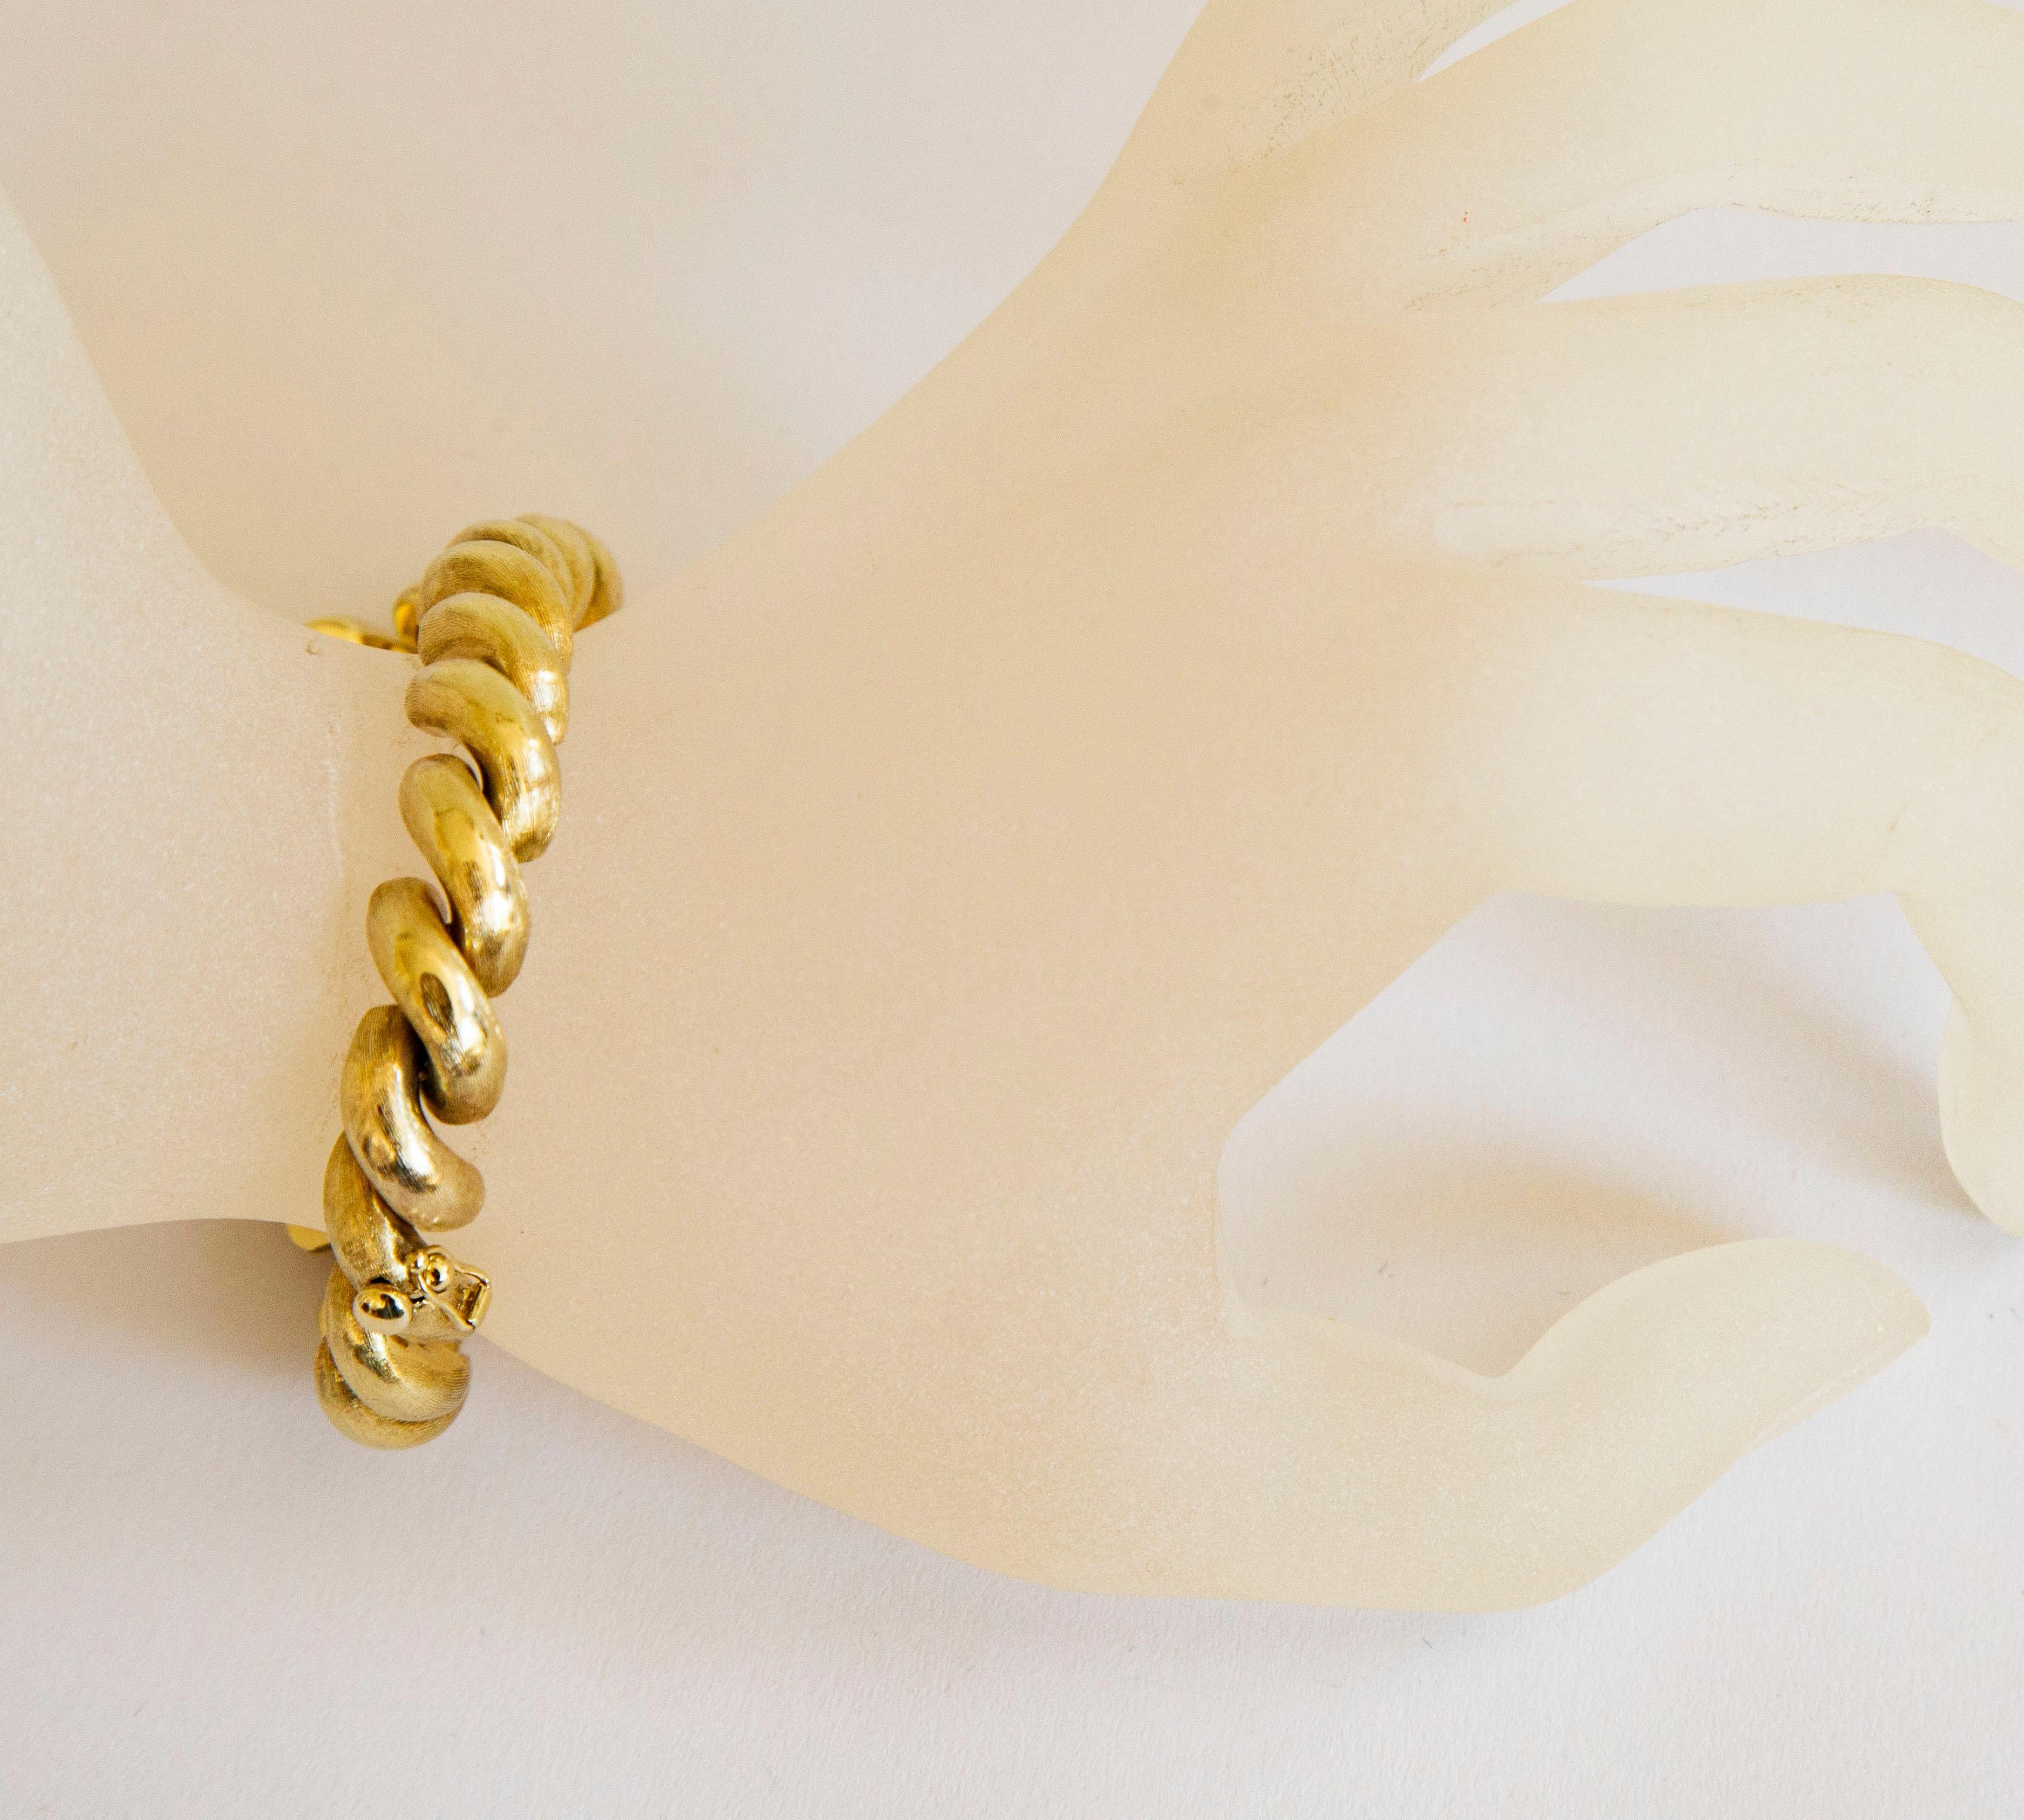 A vintage 14 karat/585 yellow gold half-chain link San Marco Macaroni bracelet with matte and textured finish. It has an insert clasp and safety lock for a secure closure.
The bracelet was tested and it is stamped for 585/14 karat gold content. The